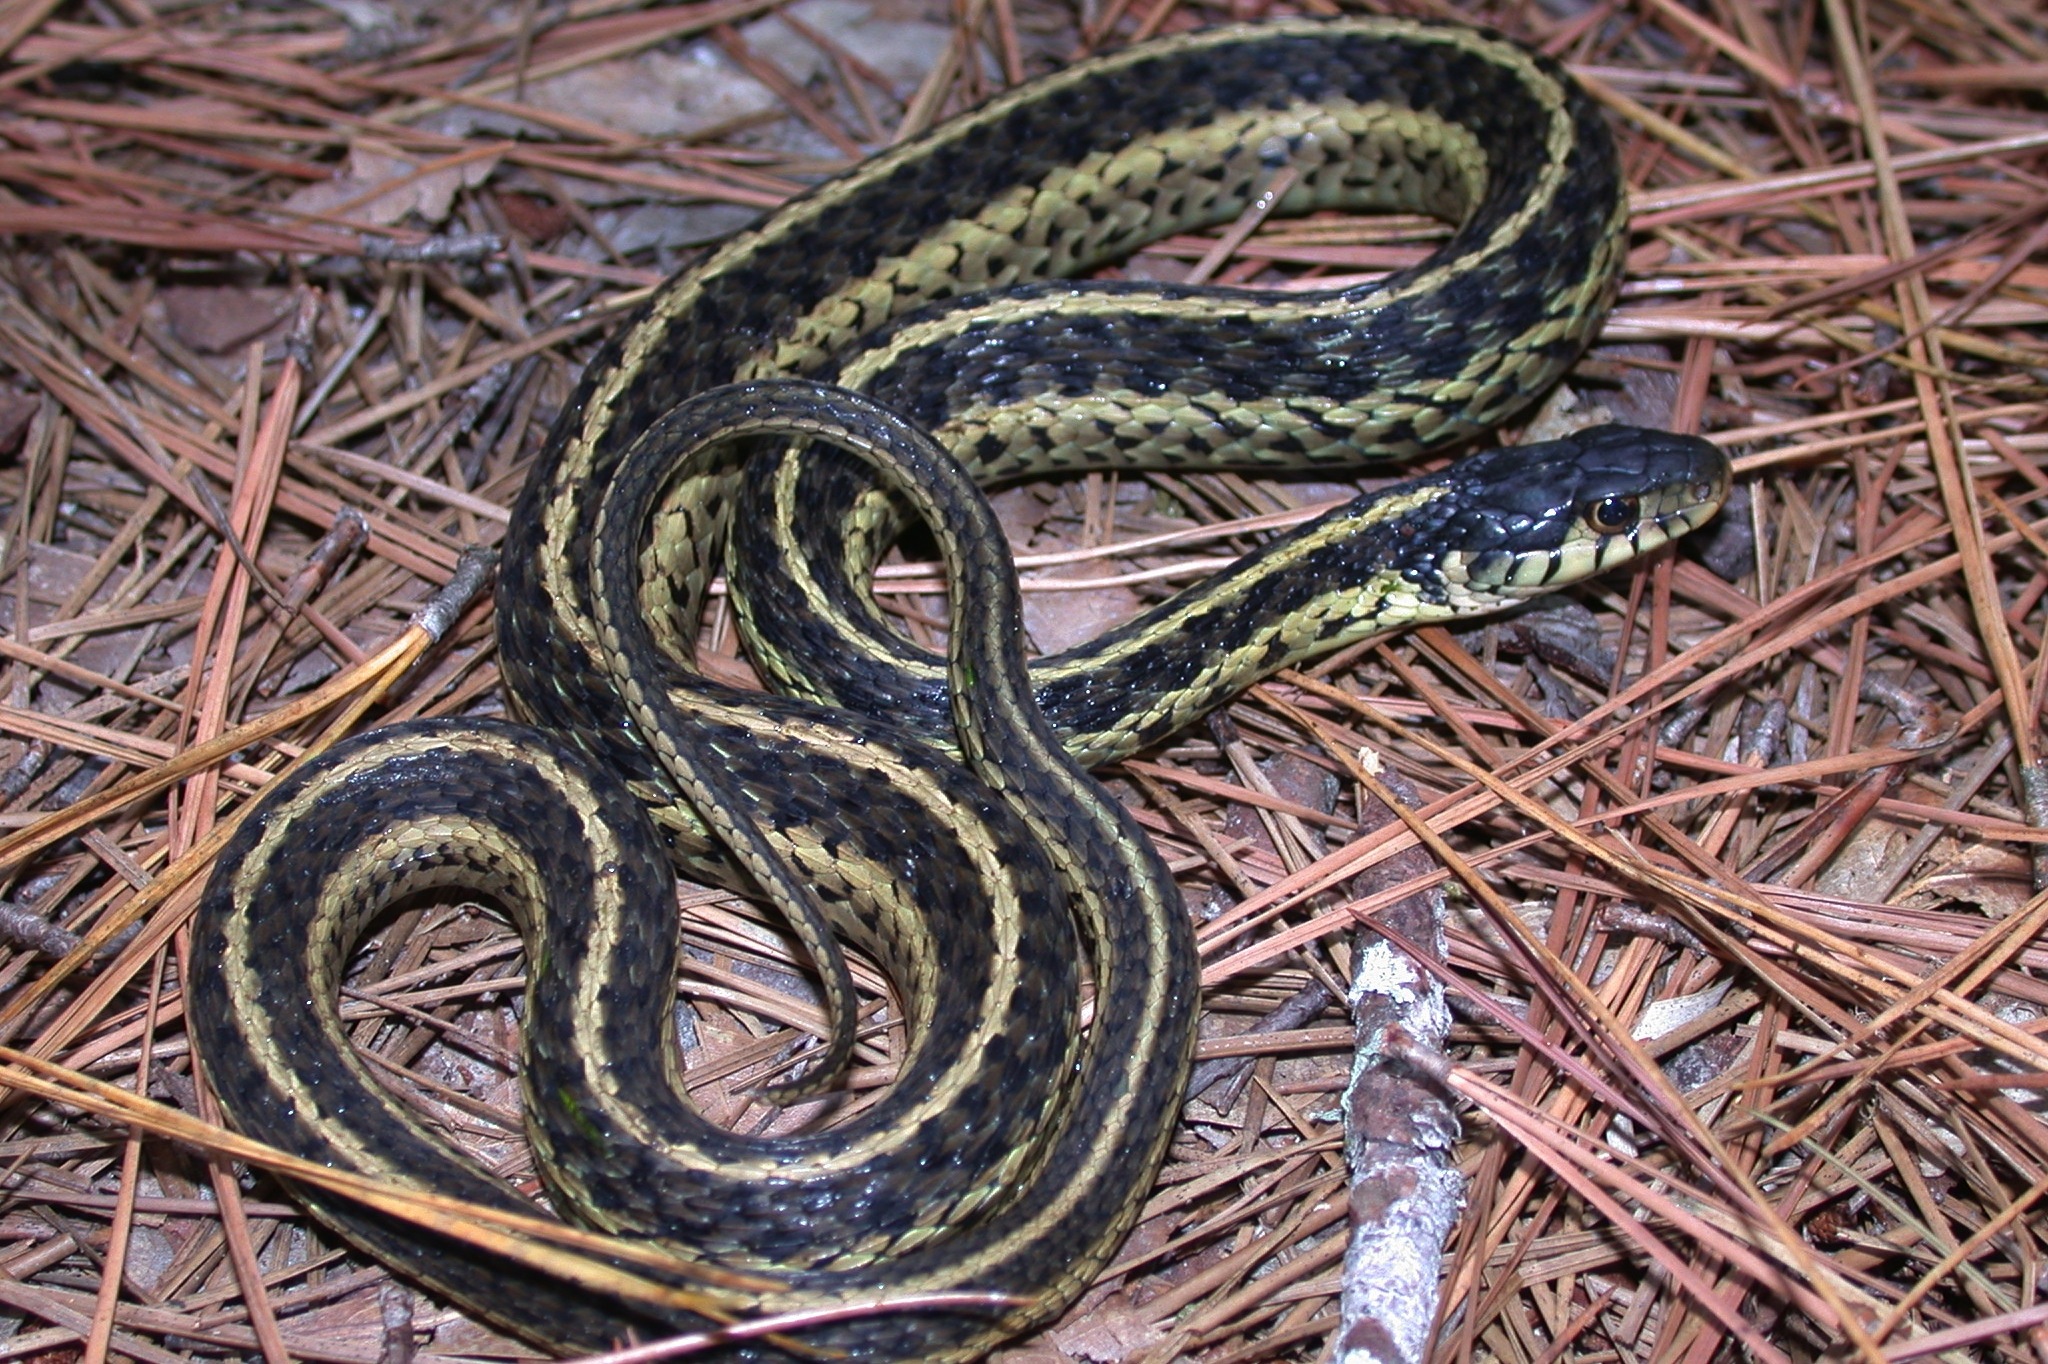 Diet Of Black And Yellow Snakes